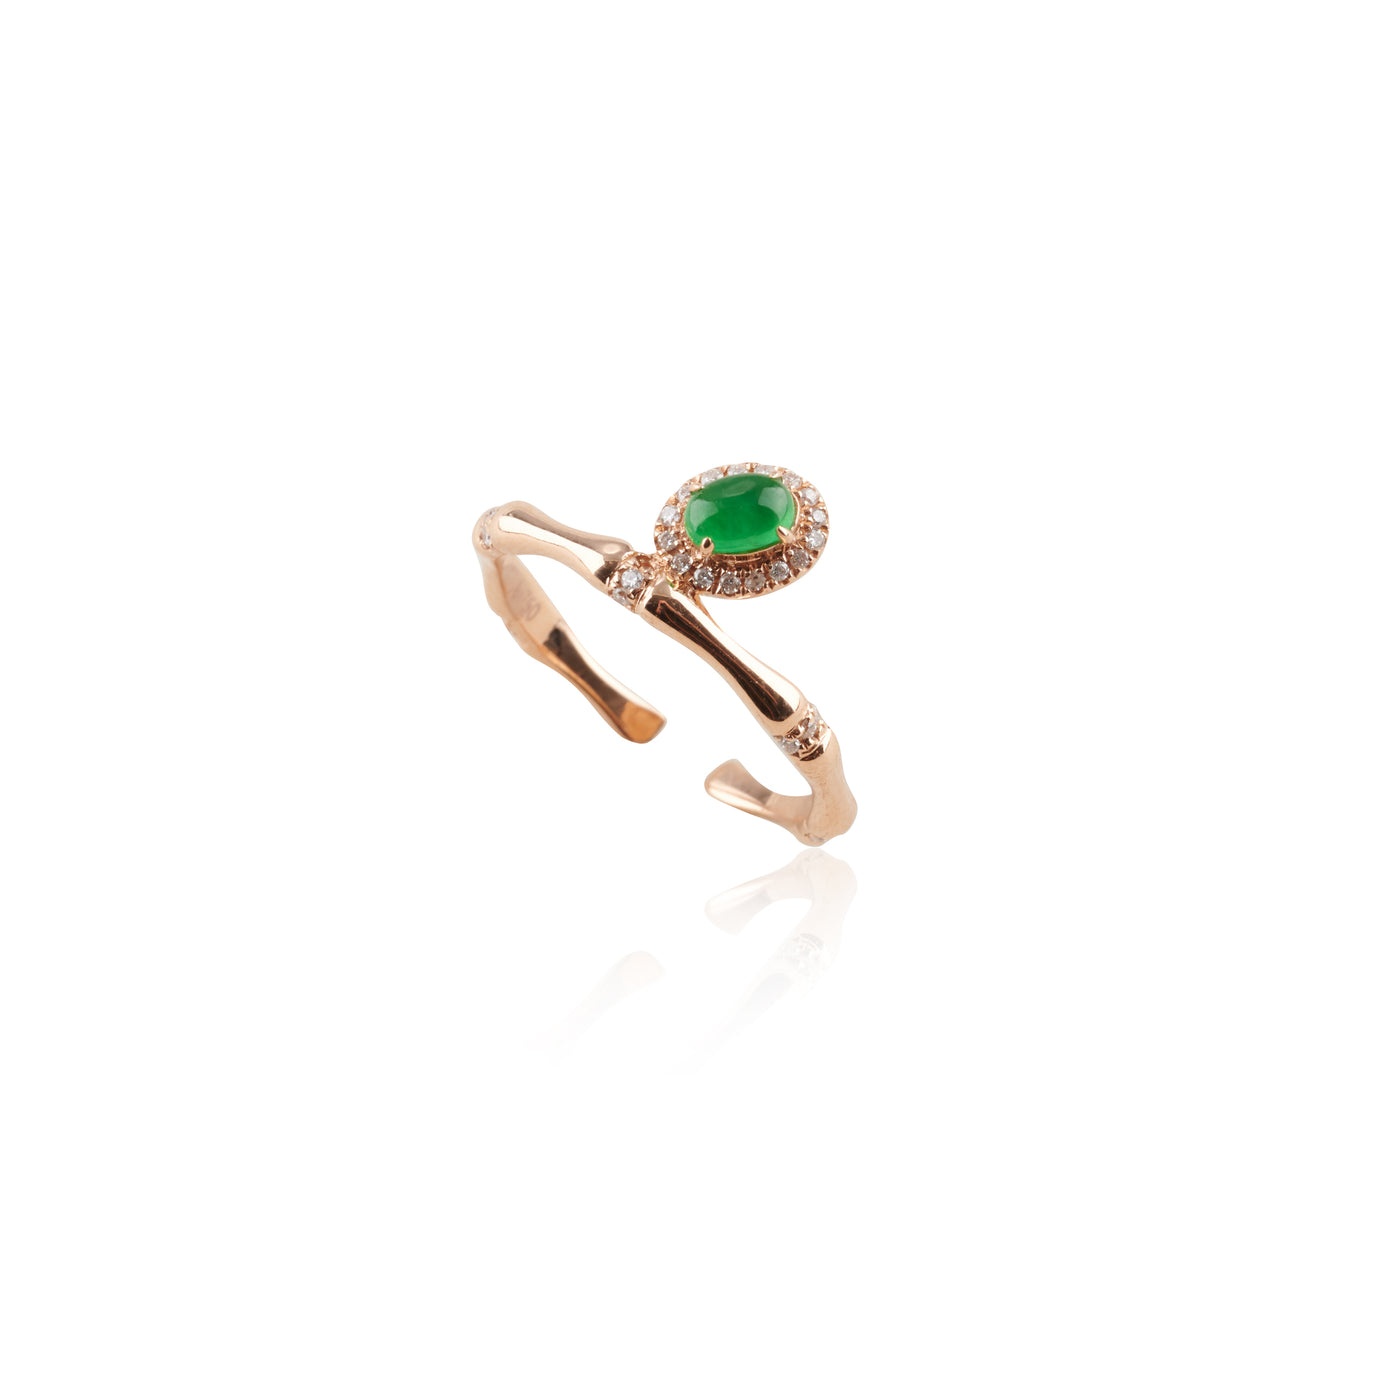 Jadeite Cabochon ring in 18k yellow gold with diamond